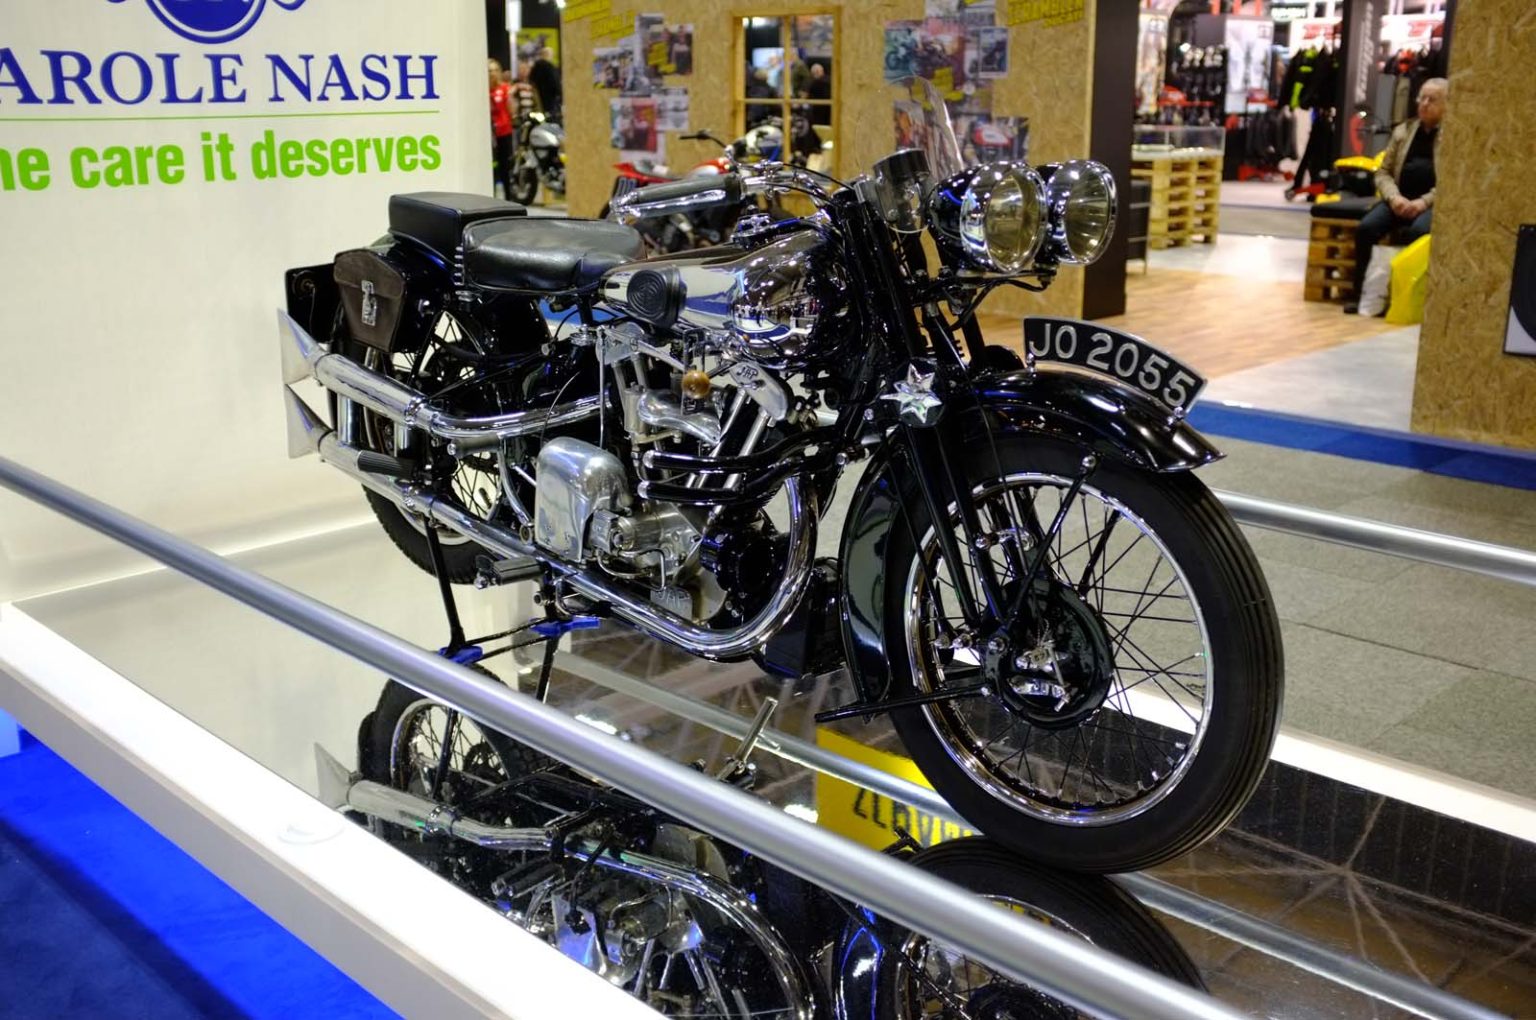 Brough Superior - Can I Display Black And Silver Number Plates On My Classic Car Or Motorcycle?